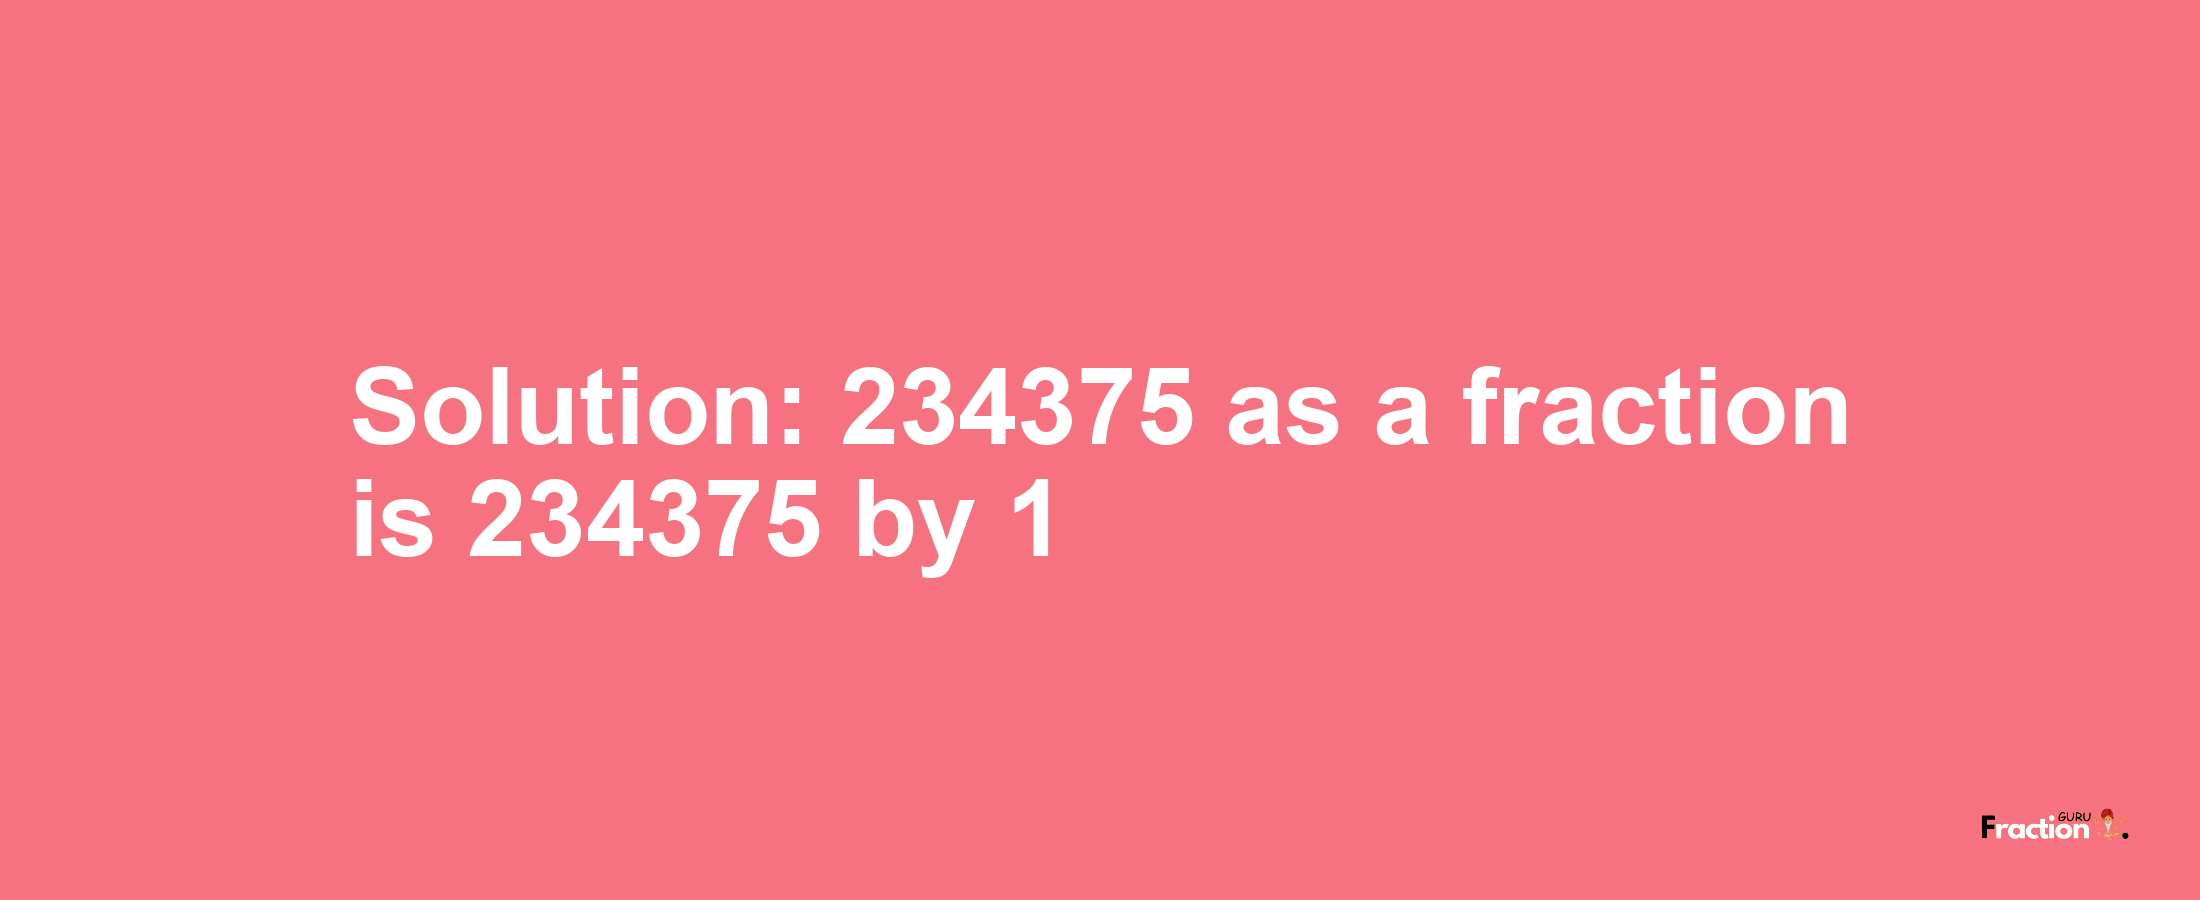 Solution:234375 as a fraction is 234375/1